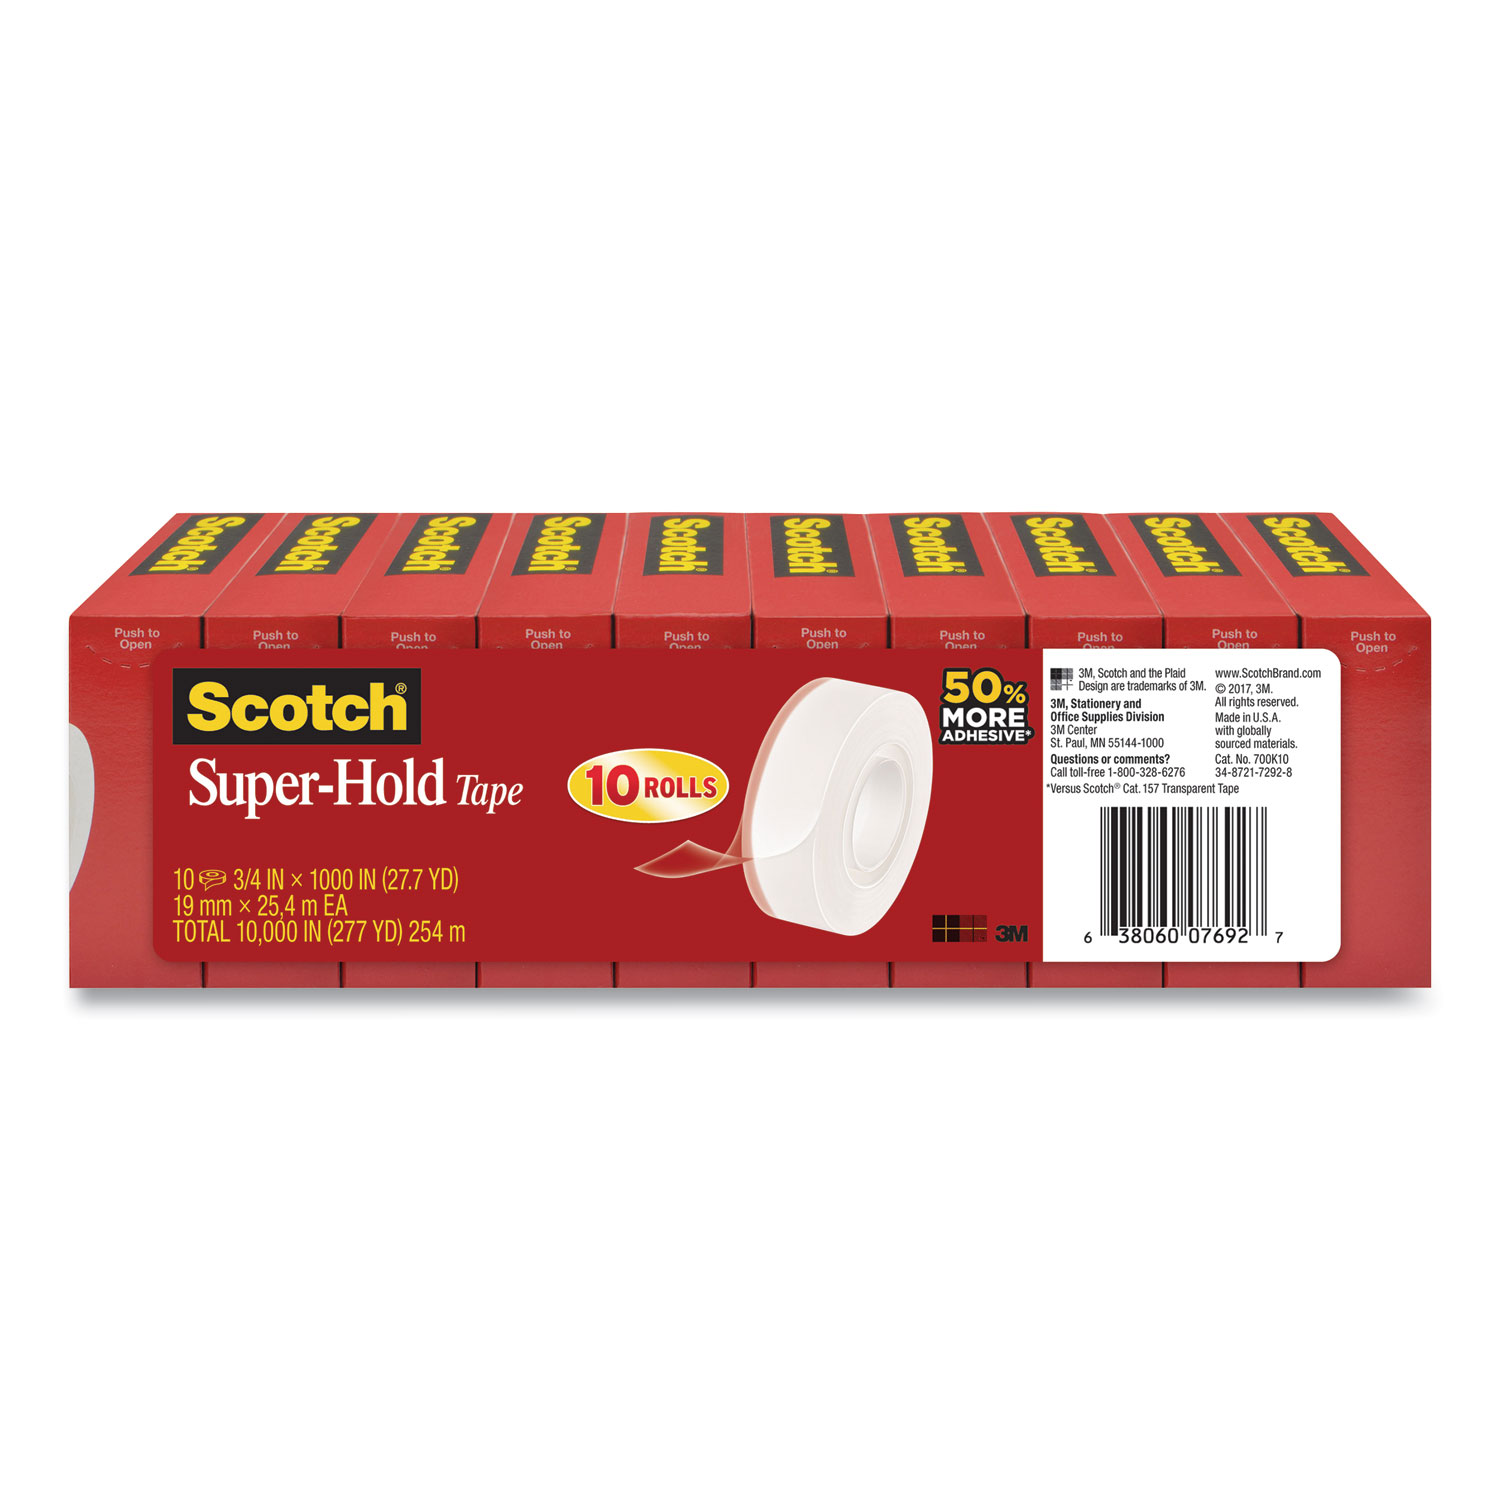  Scotch 700K10 Super-Hold Tape Refill, 1 Core, 0.75 x 27.77 yds, Crystal Clear, 10 Rolls/Pack (MMM24364767) 